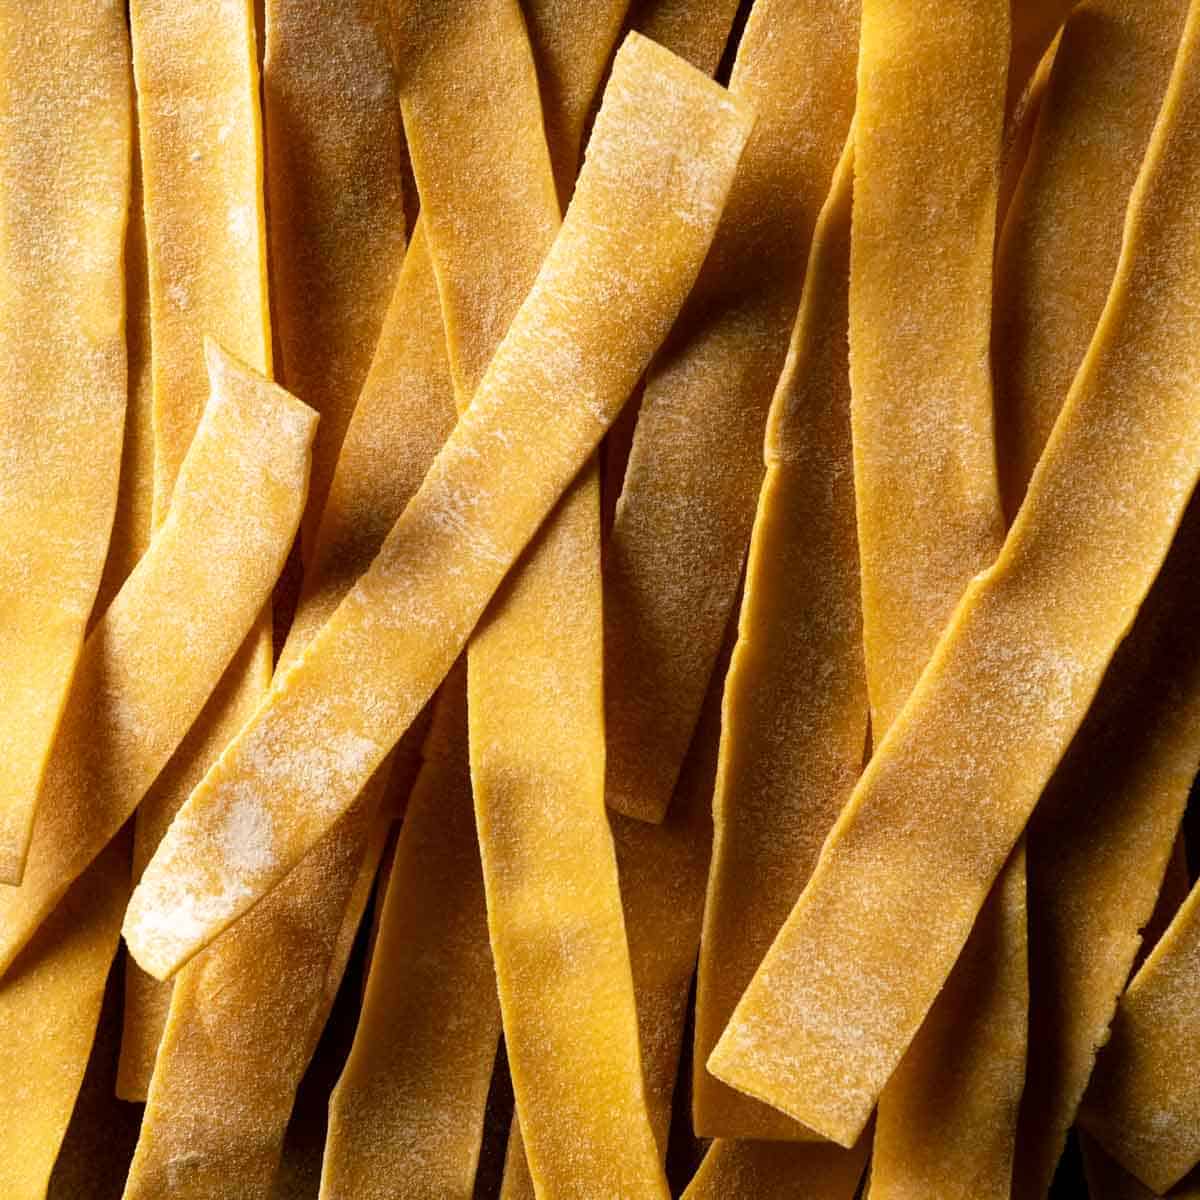 A close up photo of dried ribbons of pappardelle pasta.